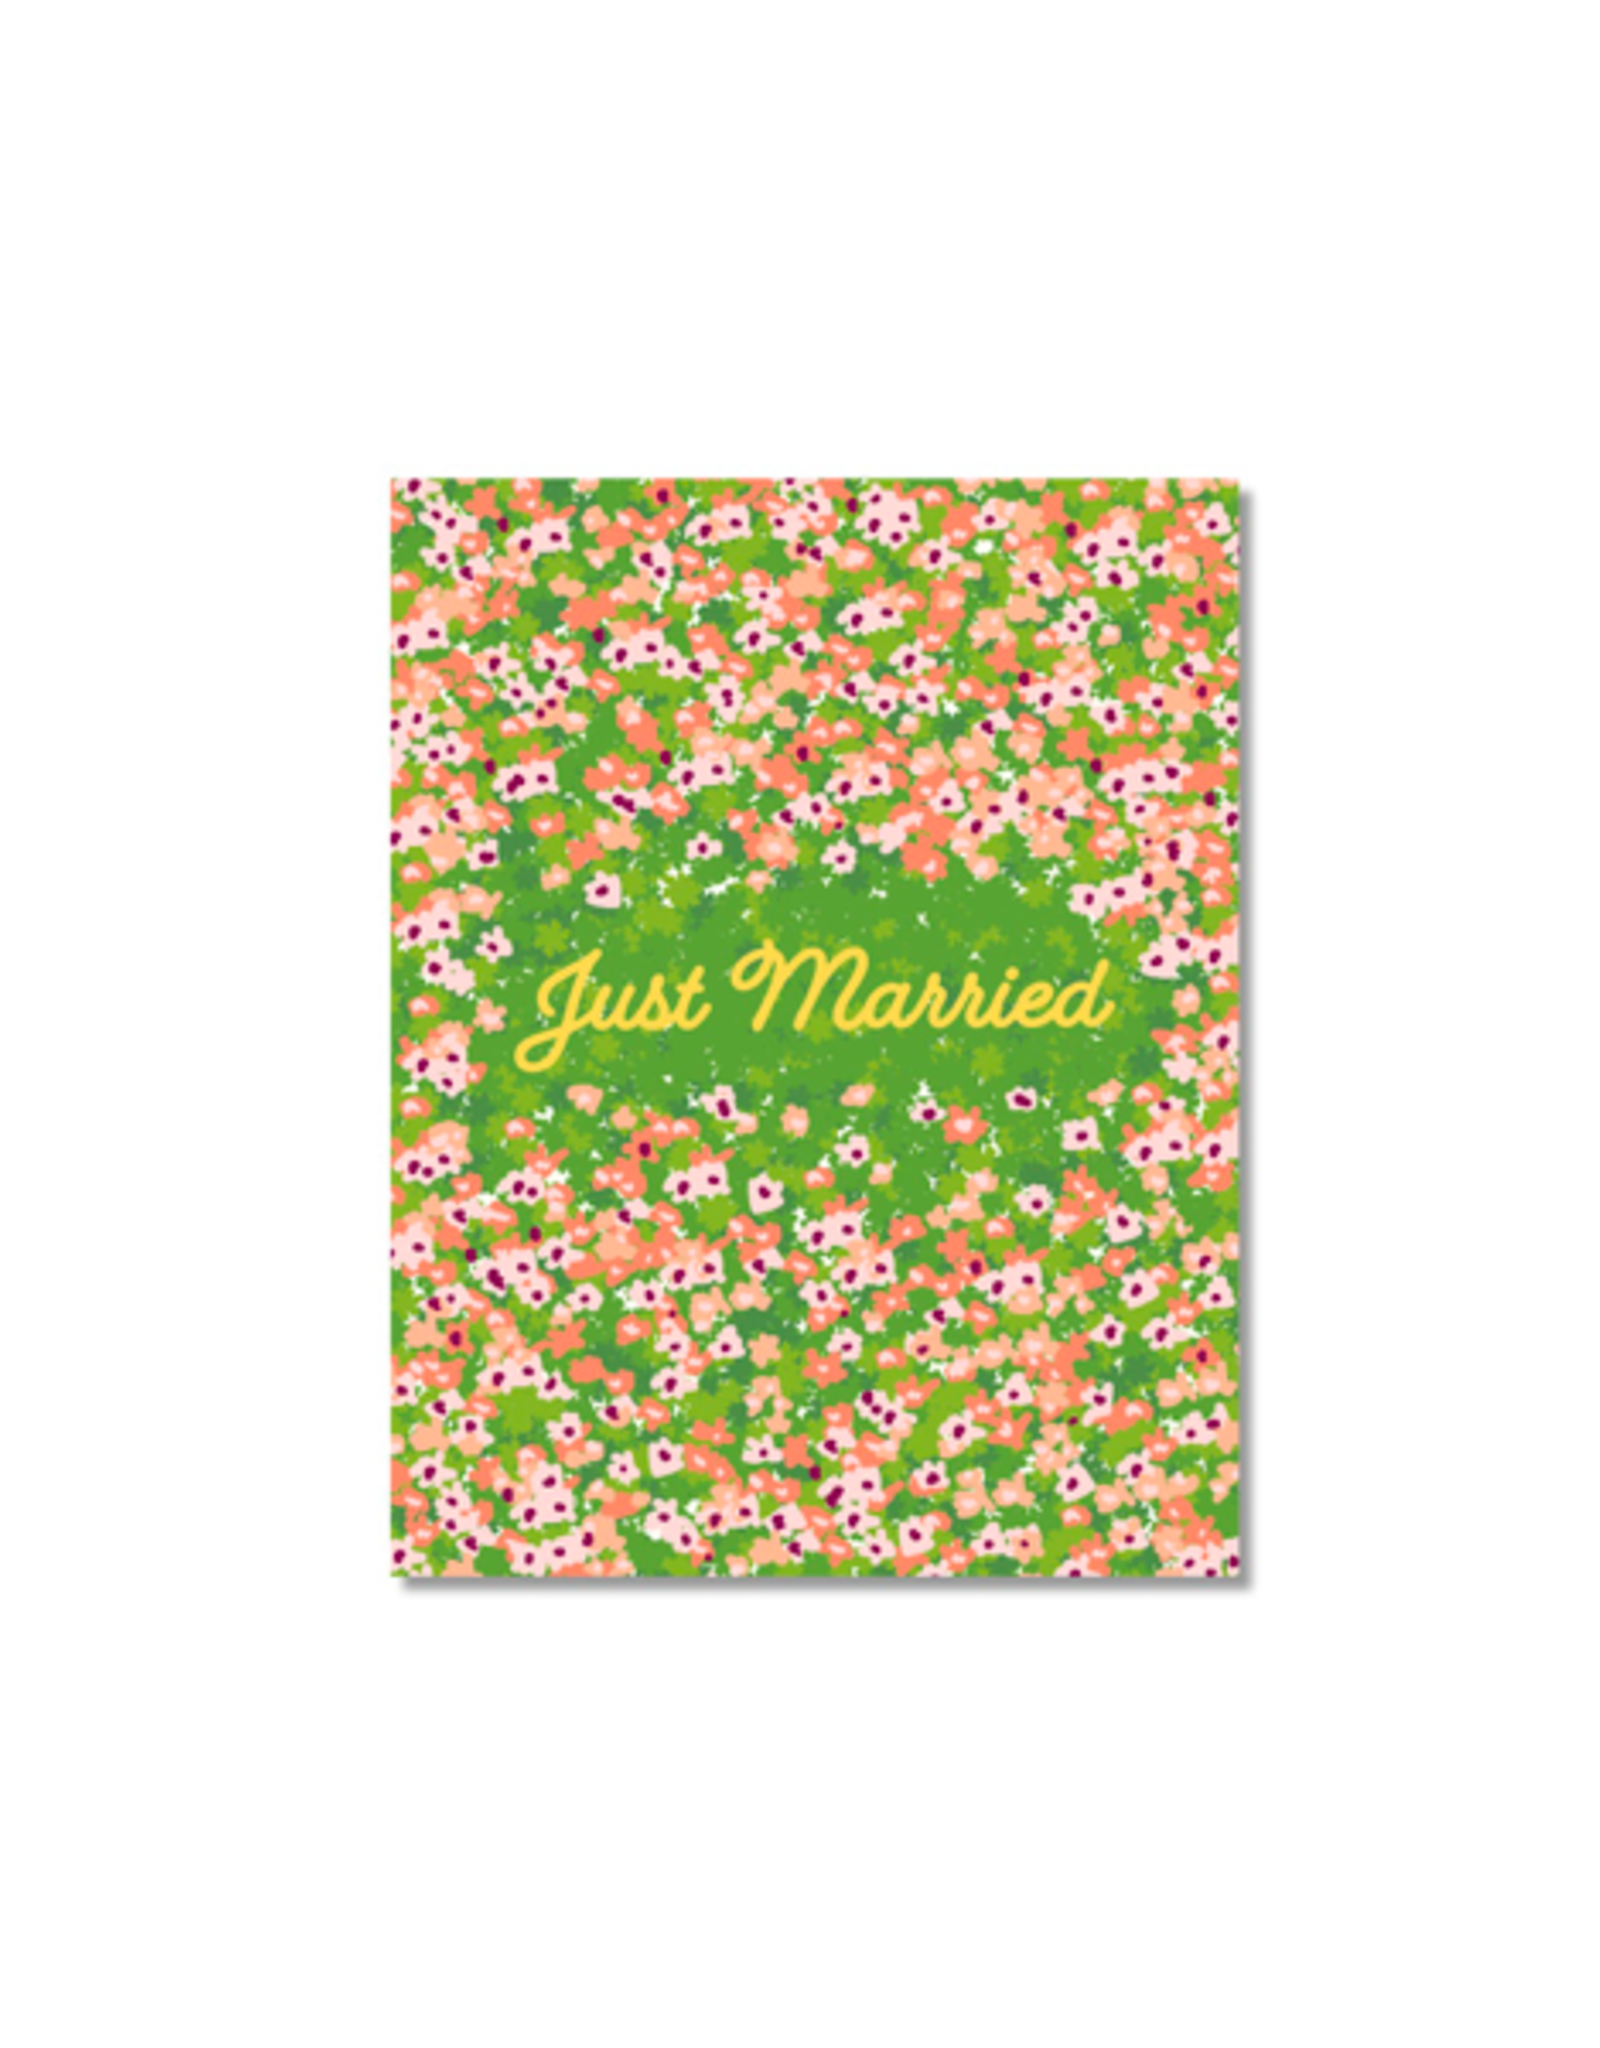 PPS - Card / Just Married, 4.5 x 5.5"